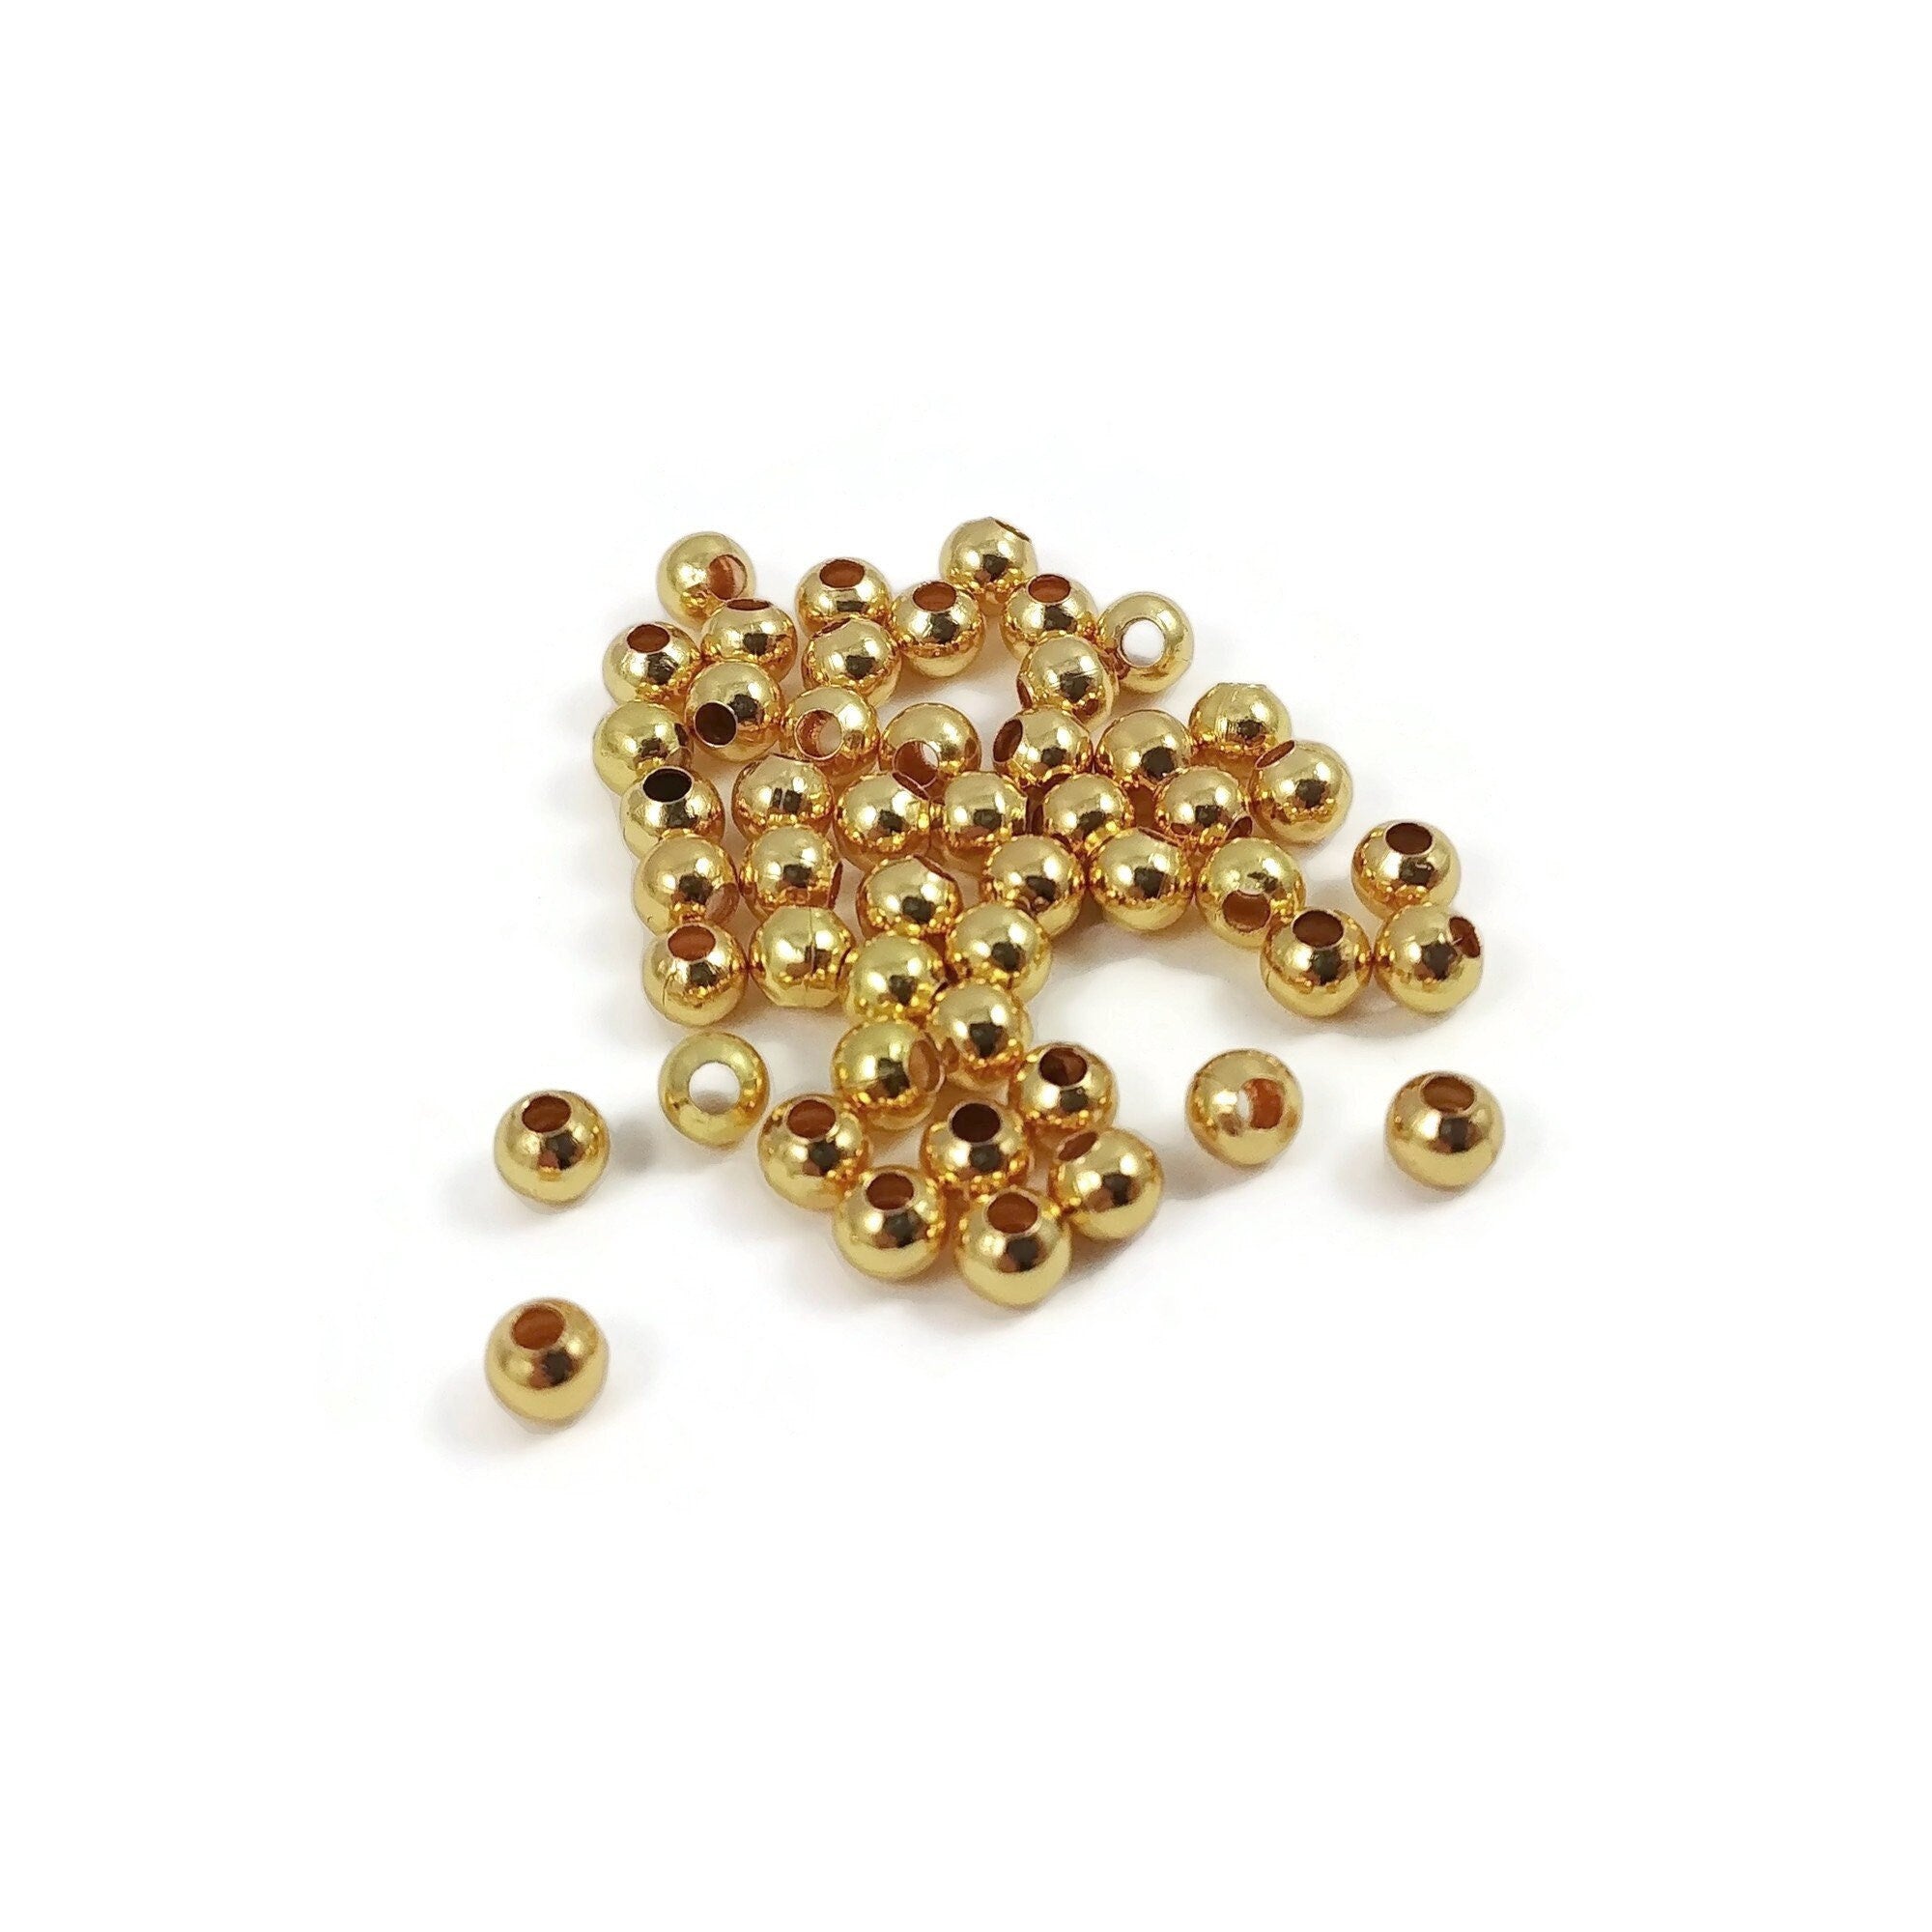  50 Count Wholesale 14K Gold-Filled 4mm Round Seamless